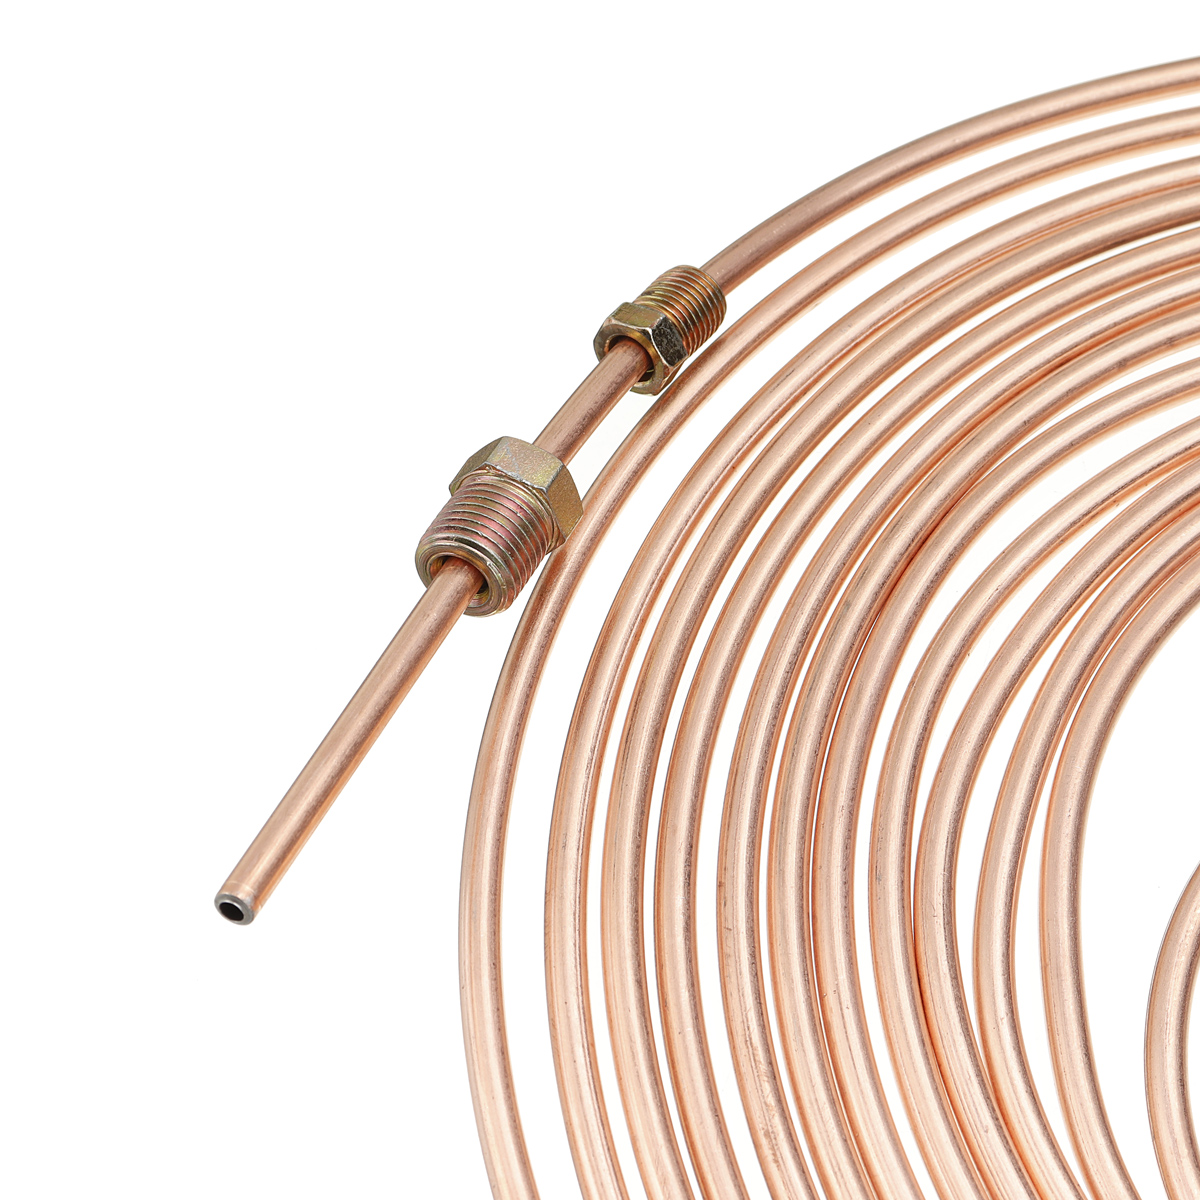 Universal-25Ft-Copper-Nickel-Brake-Line-Tubing-Kit-316quot-OD-with-15Pcs-Nuts-1586631-9